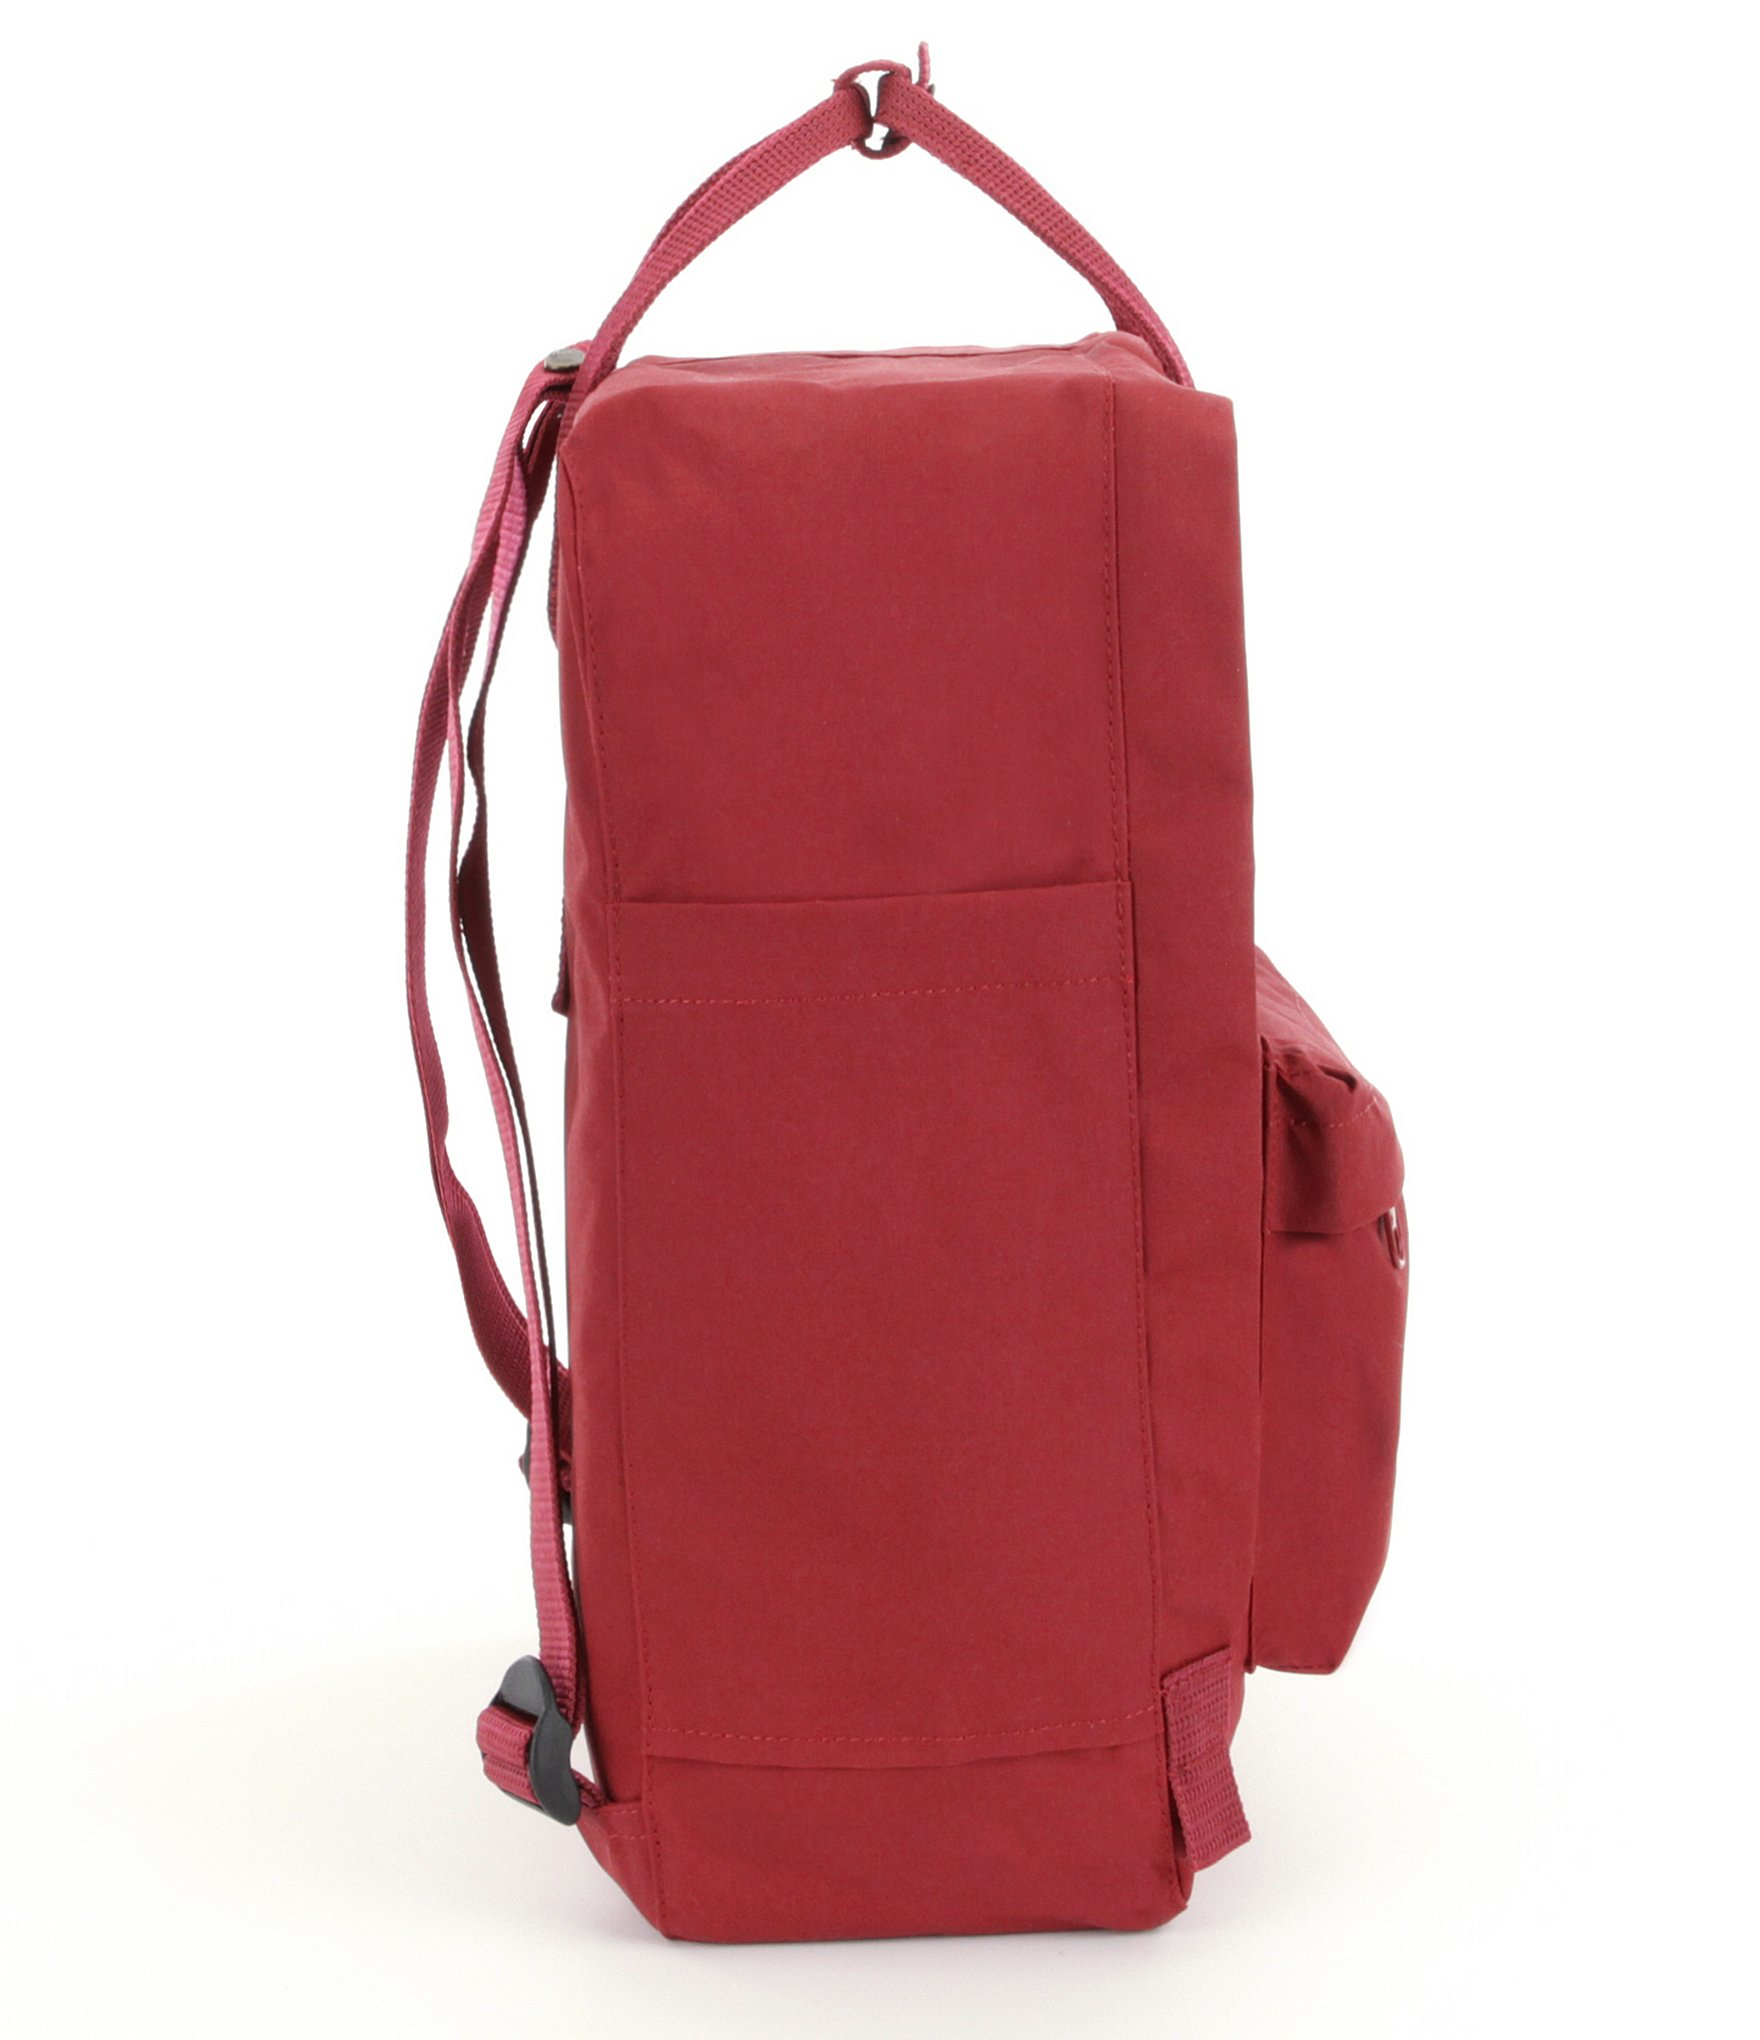 Lyst - Fjallraven The Classic Kanken Backpack in Red